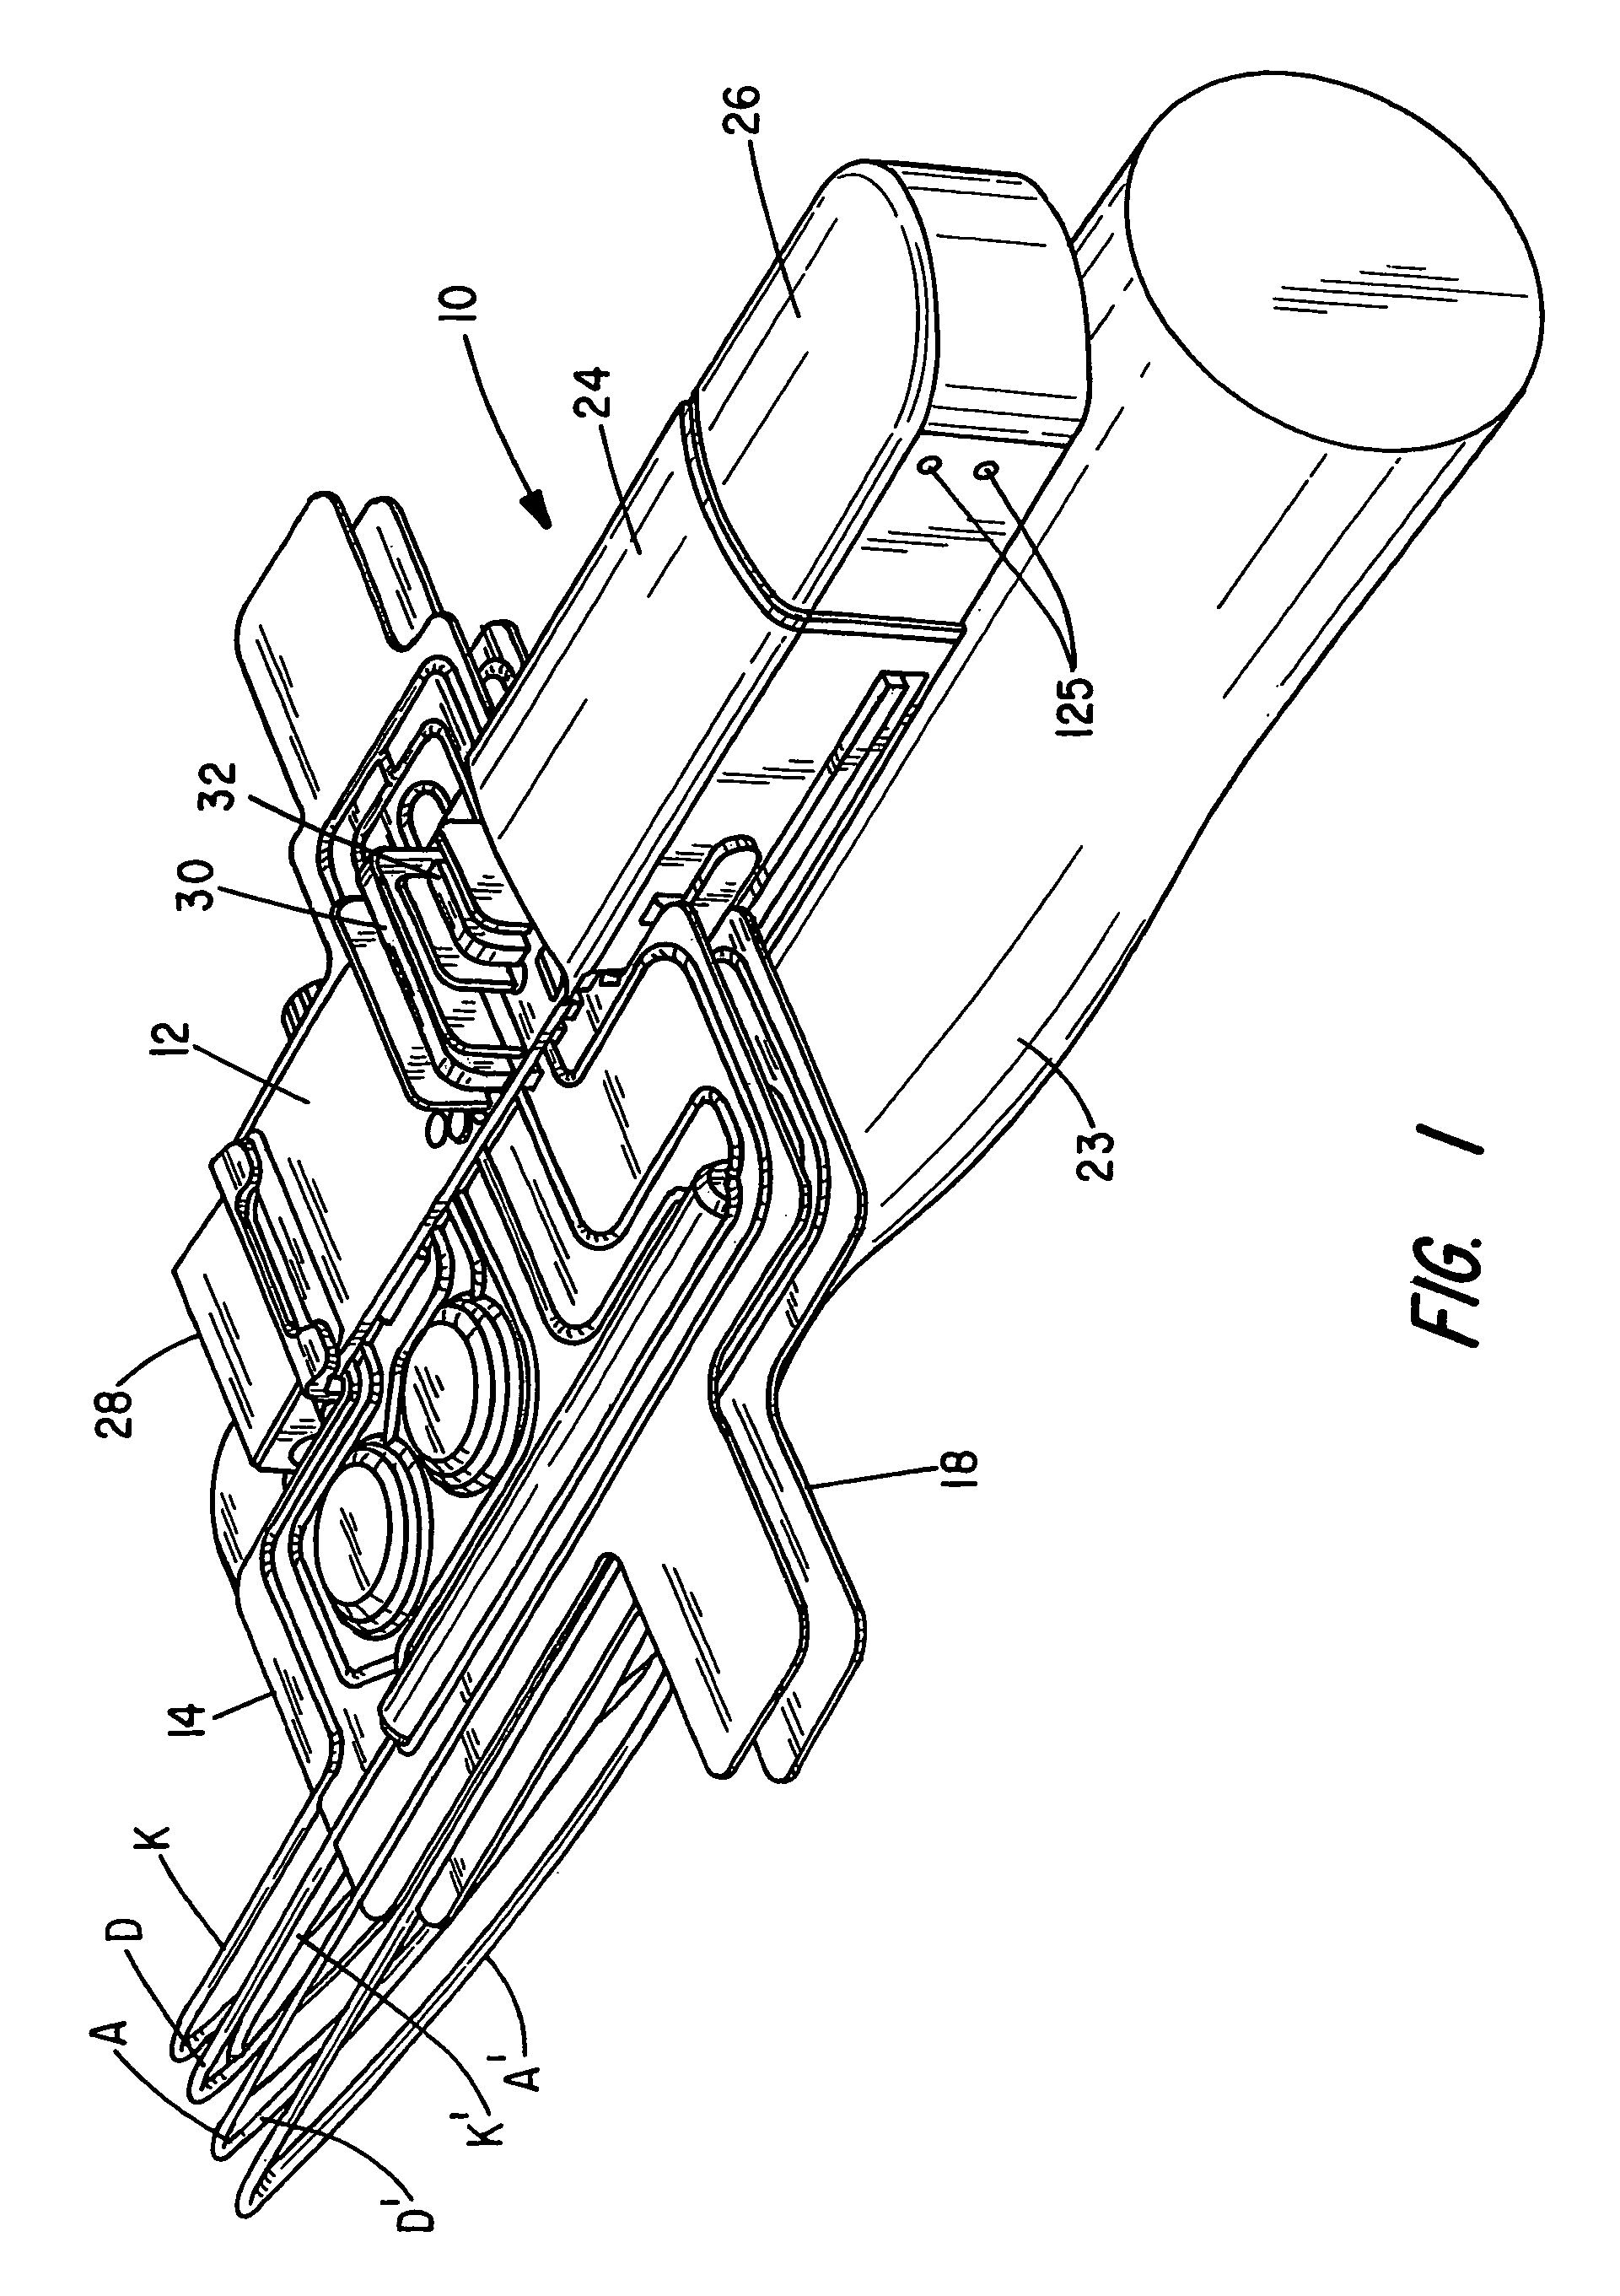 Chronic access system for extracorporeal treatment of blood including a continously wearable hemodialyzer